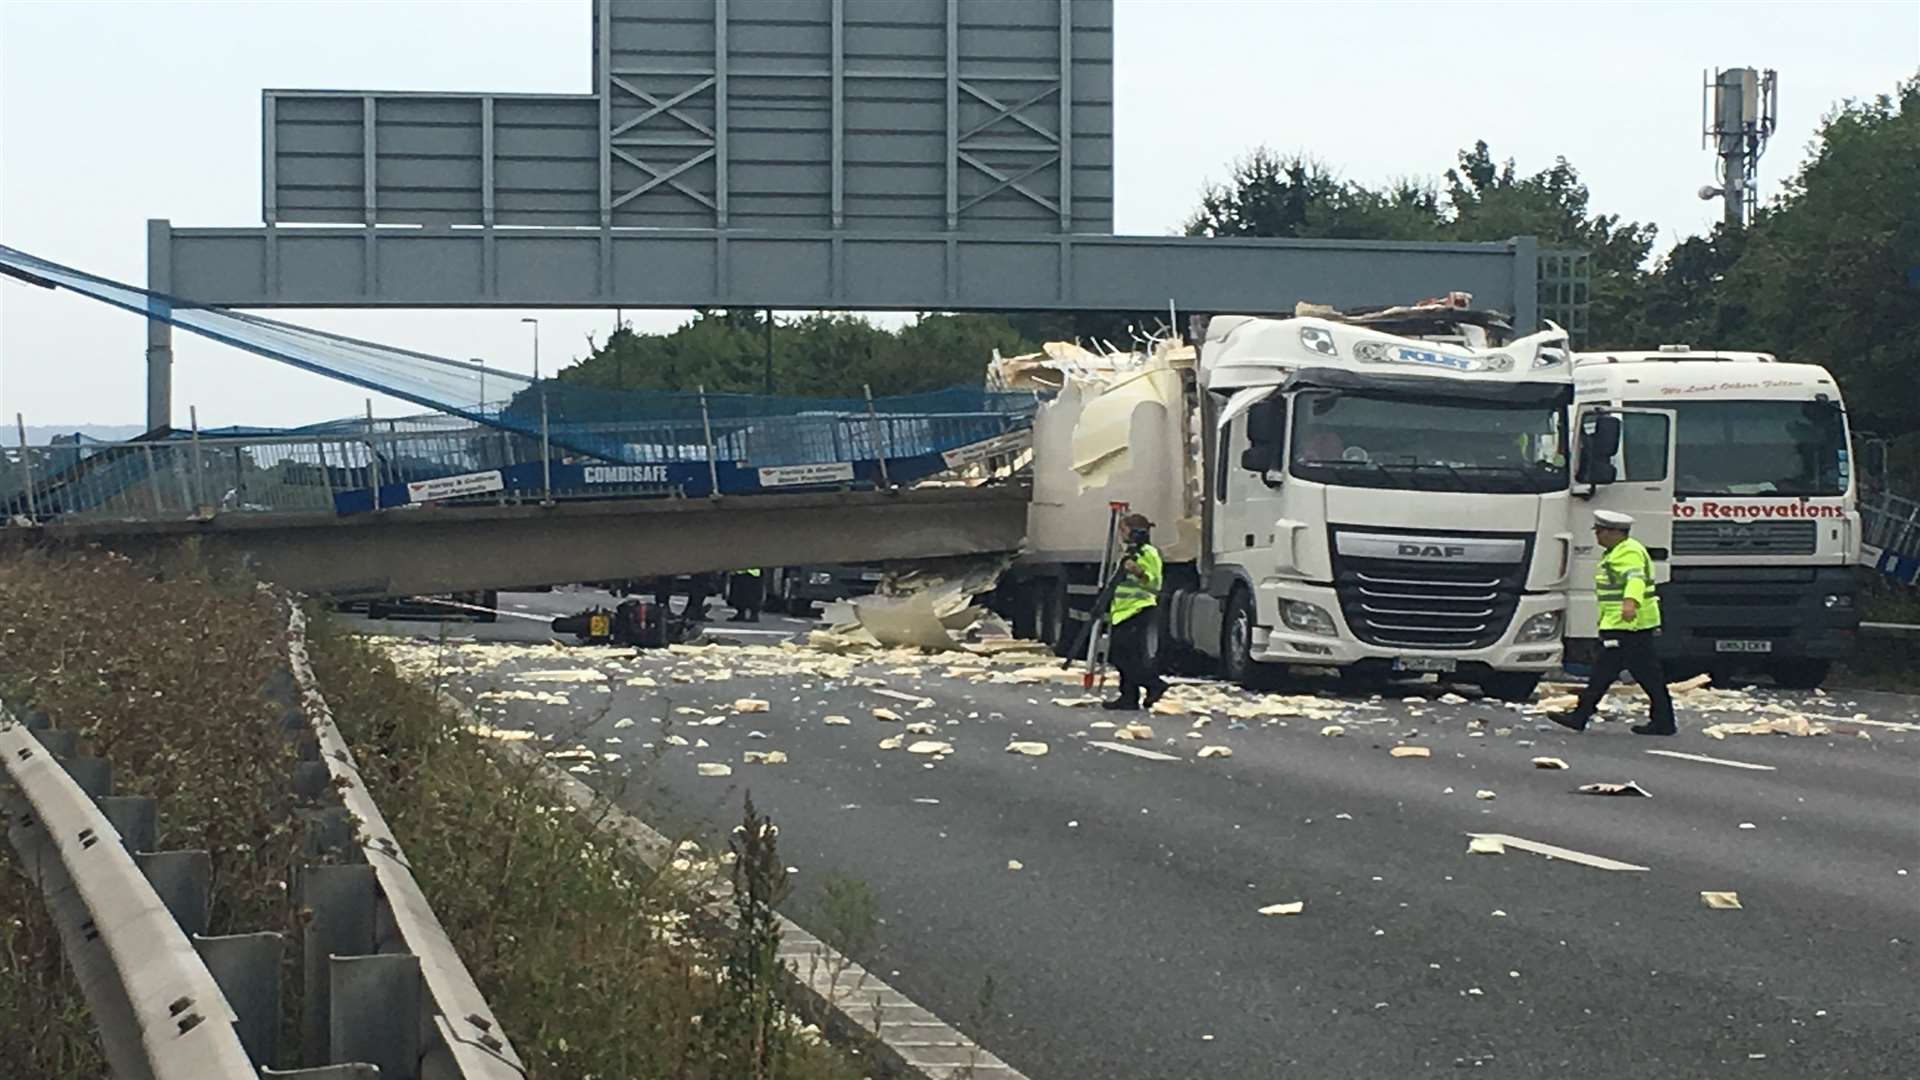 The M20 bridge collapsed after being struck by a lorry